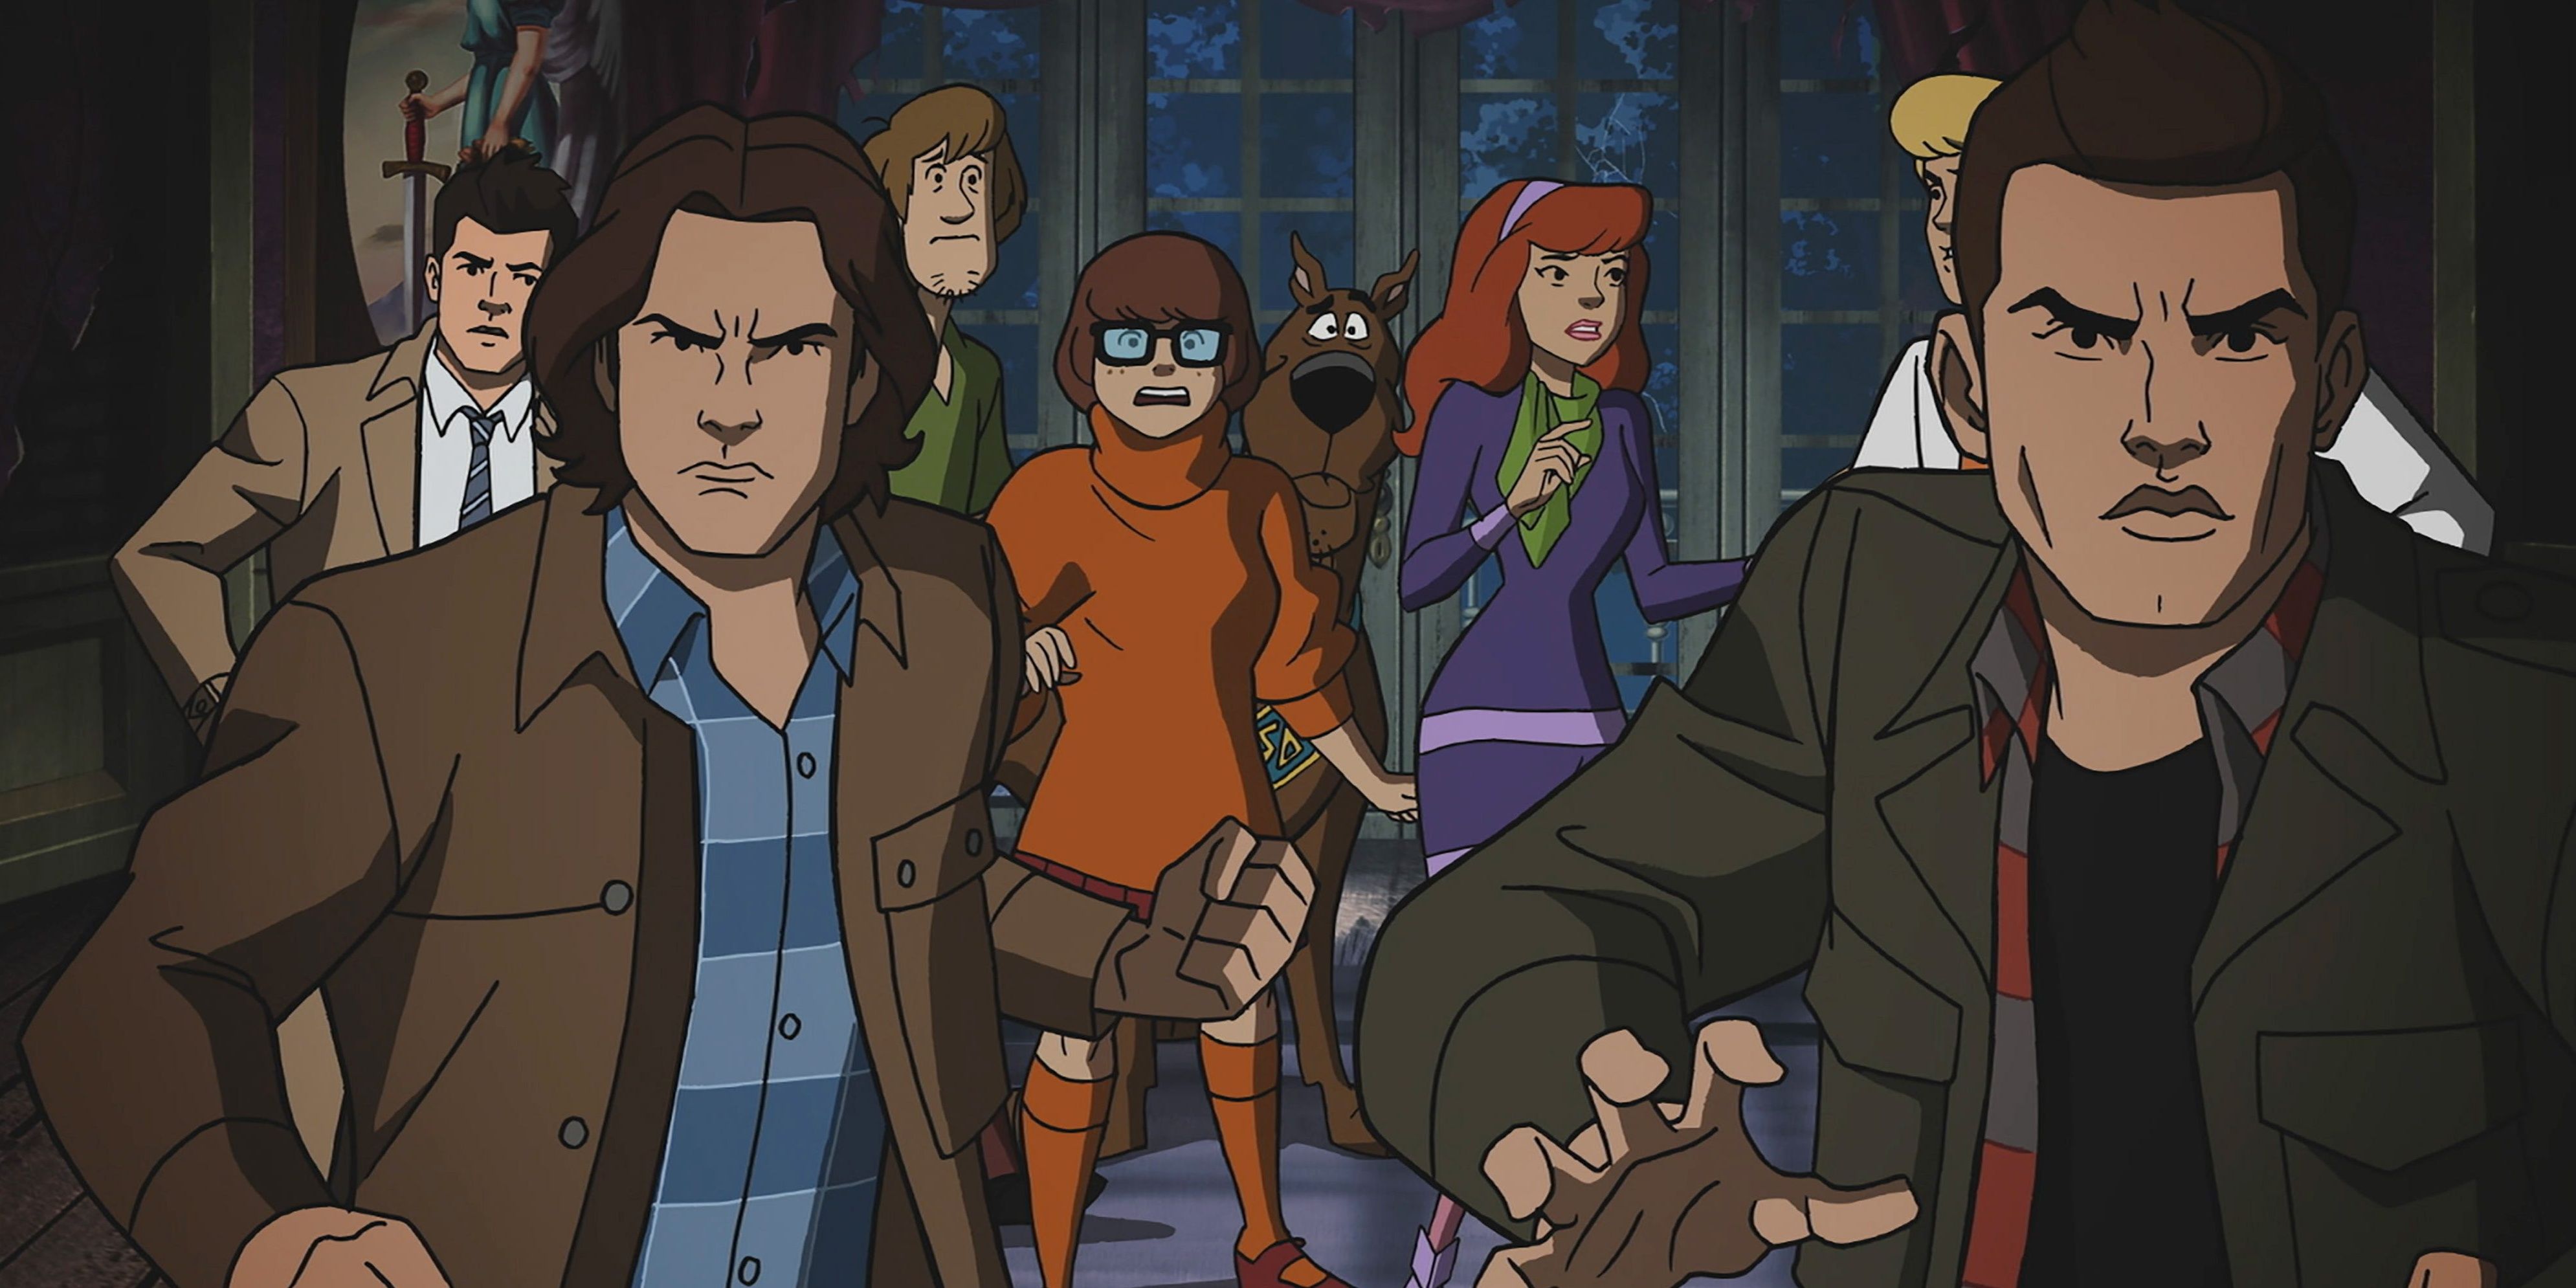 Scooby-Doo, Mystery, Inc., Sam, and Dean in Supernatural